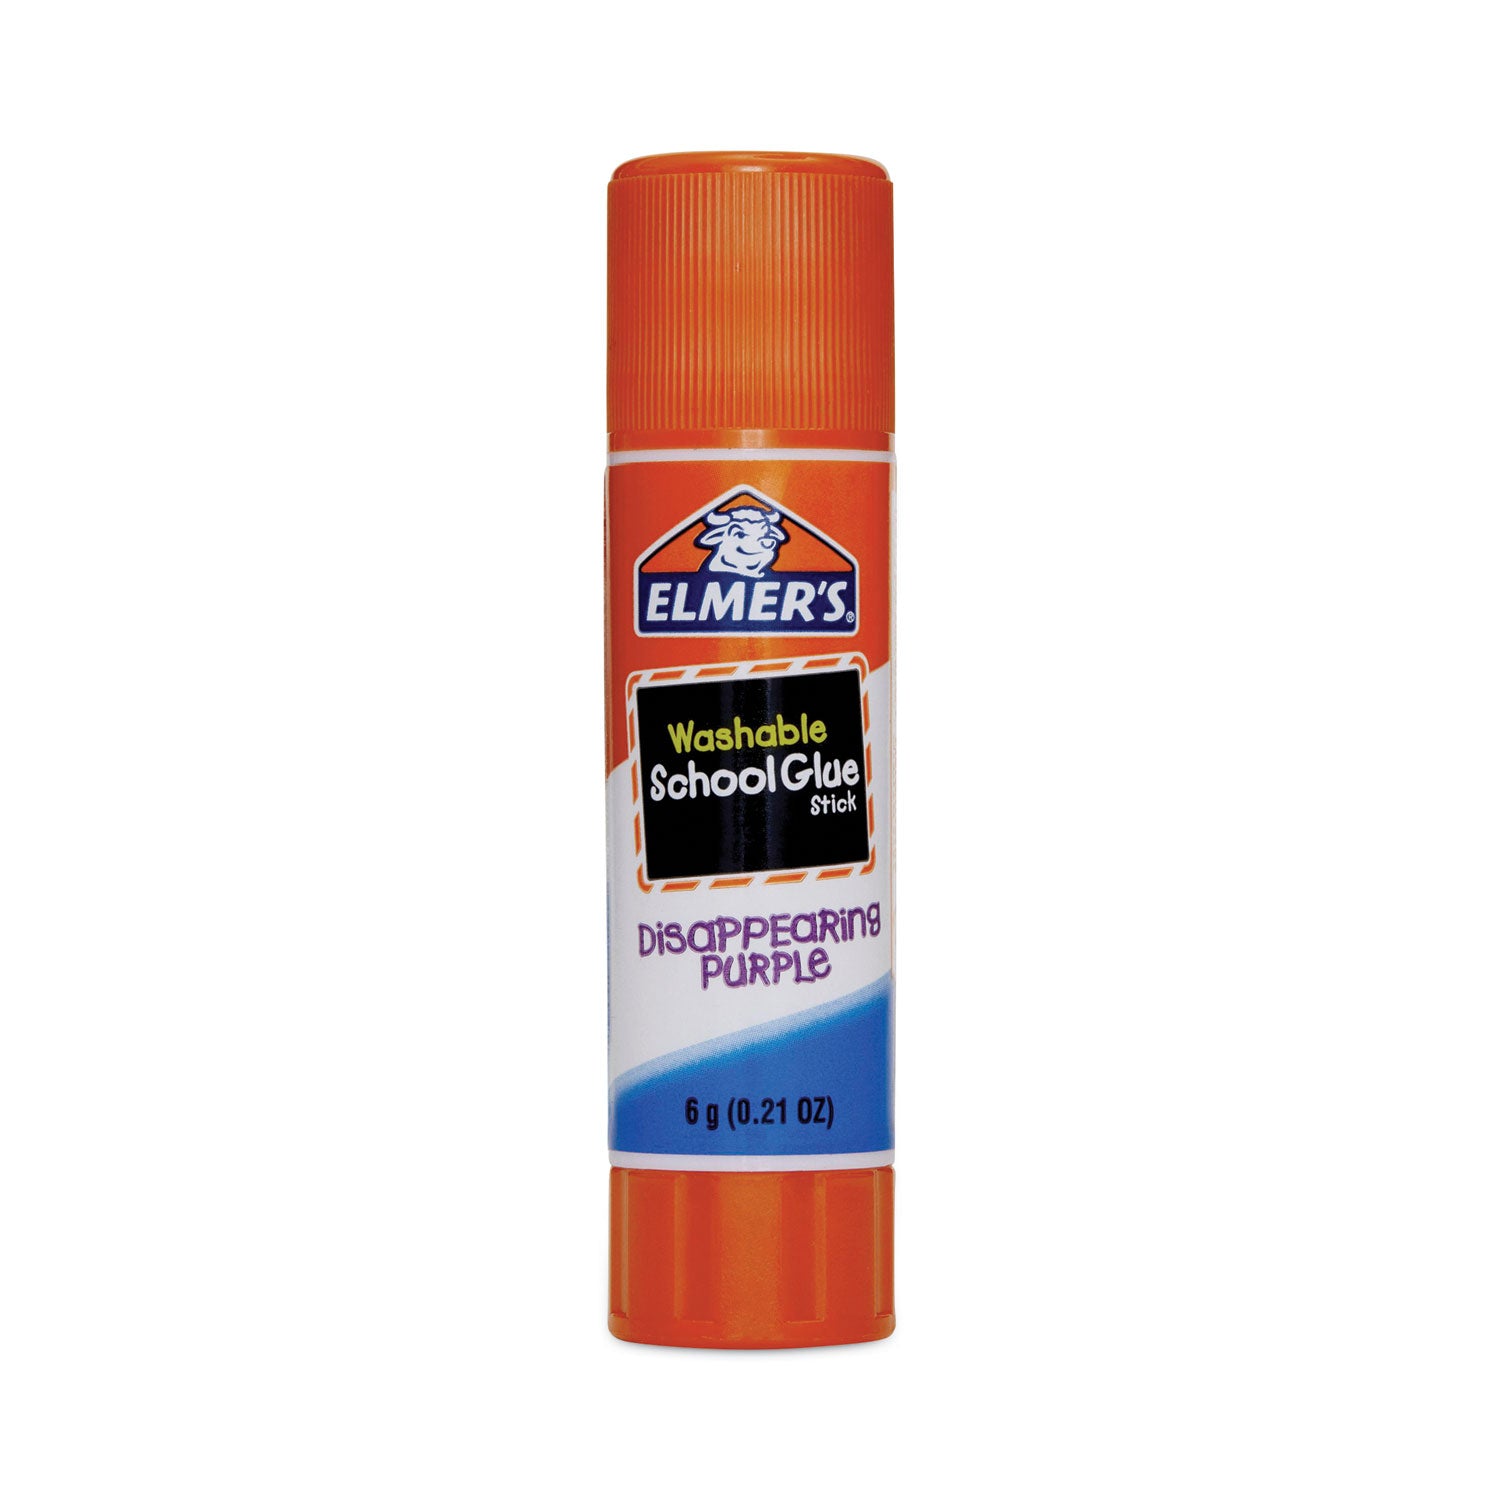 disappearing-purple-school-glue-stick-021-oz-dries-clear-12-pack_epie1559 - 1